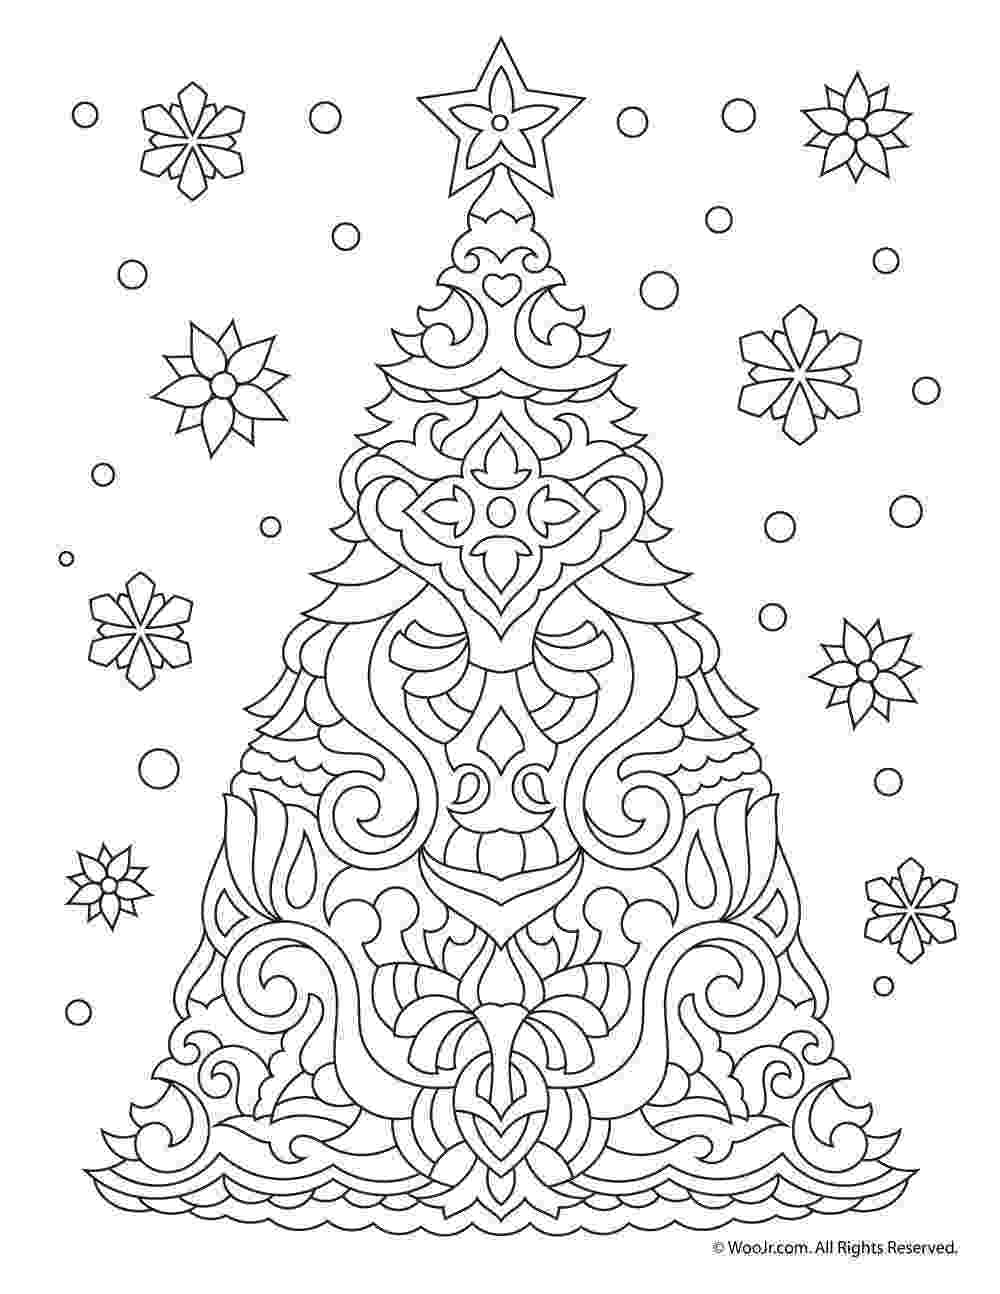 xmas colouring pages for adults 21 christmas printable coloring pages colouring pages for adults xmas 